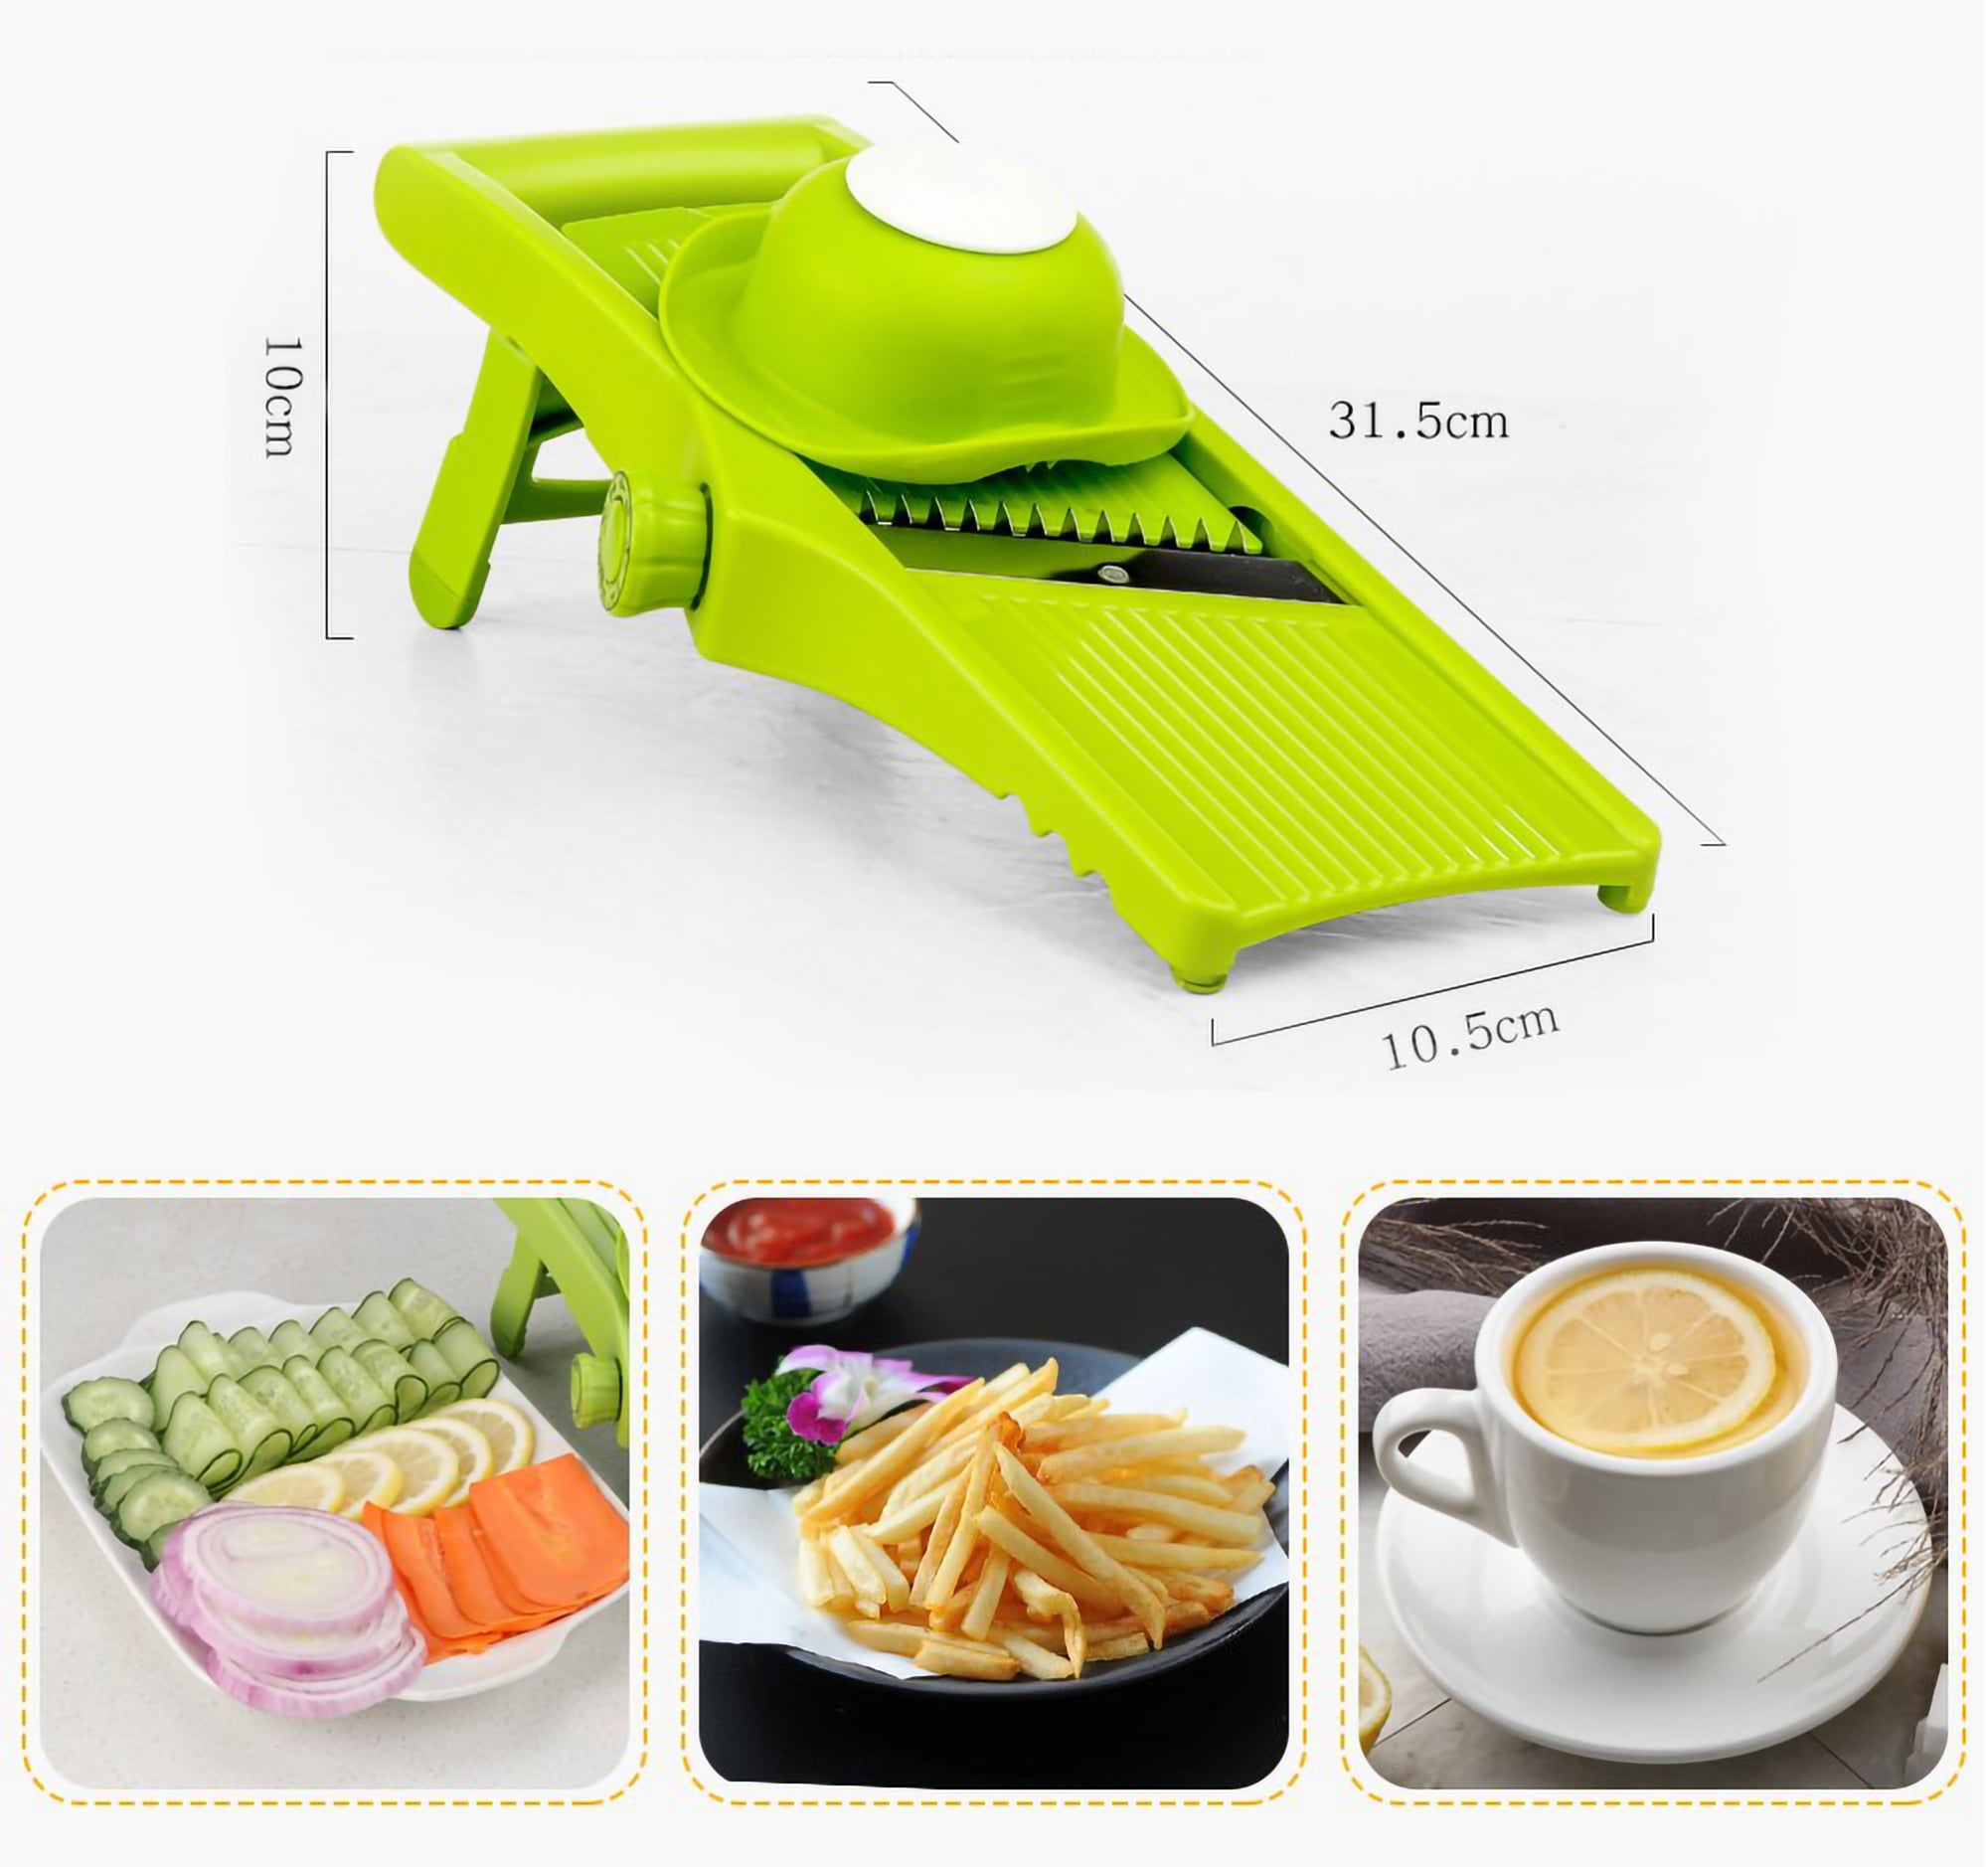 French Fry Cutter, Geedel Professional Potato Cutter for French Fries,  Potato Slicer French Fry Maker for Carrot, Cucumber, Onion, Zucchini and  more